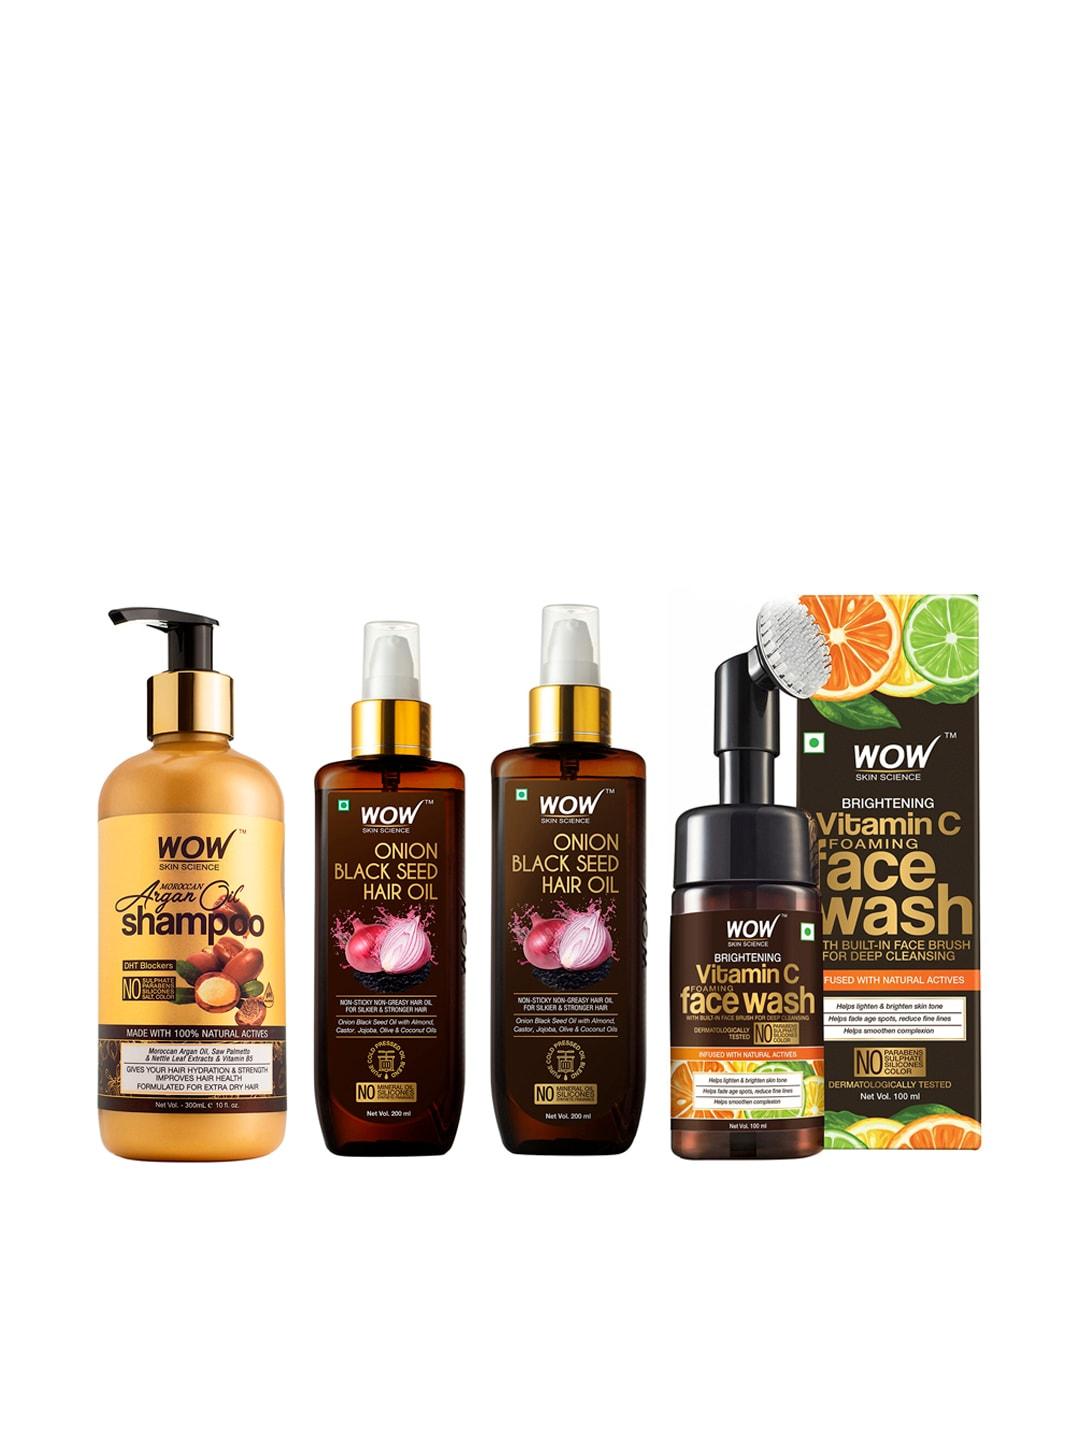 WOW SKIN SCIENCE Set of Face Wash, Shampoo & 2 Onion Black Seed Hair Oil